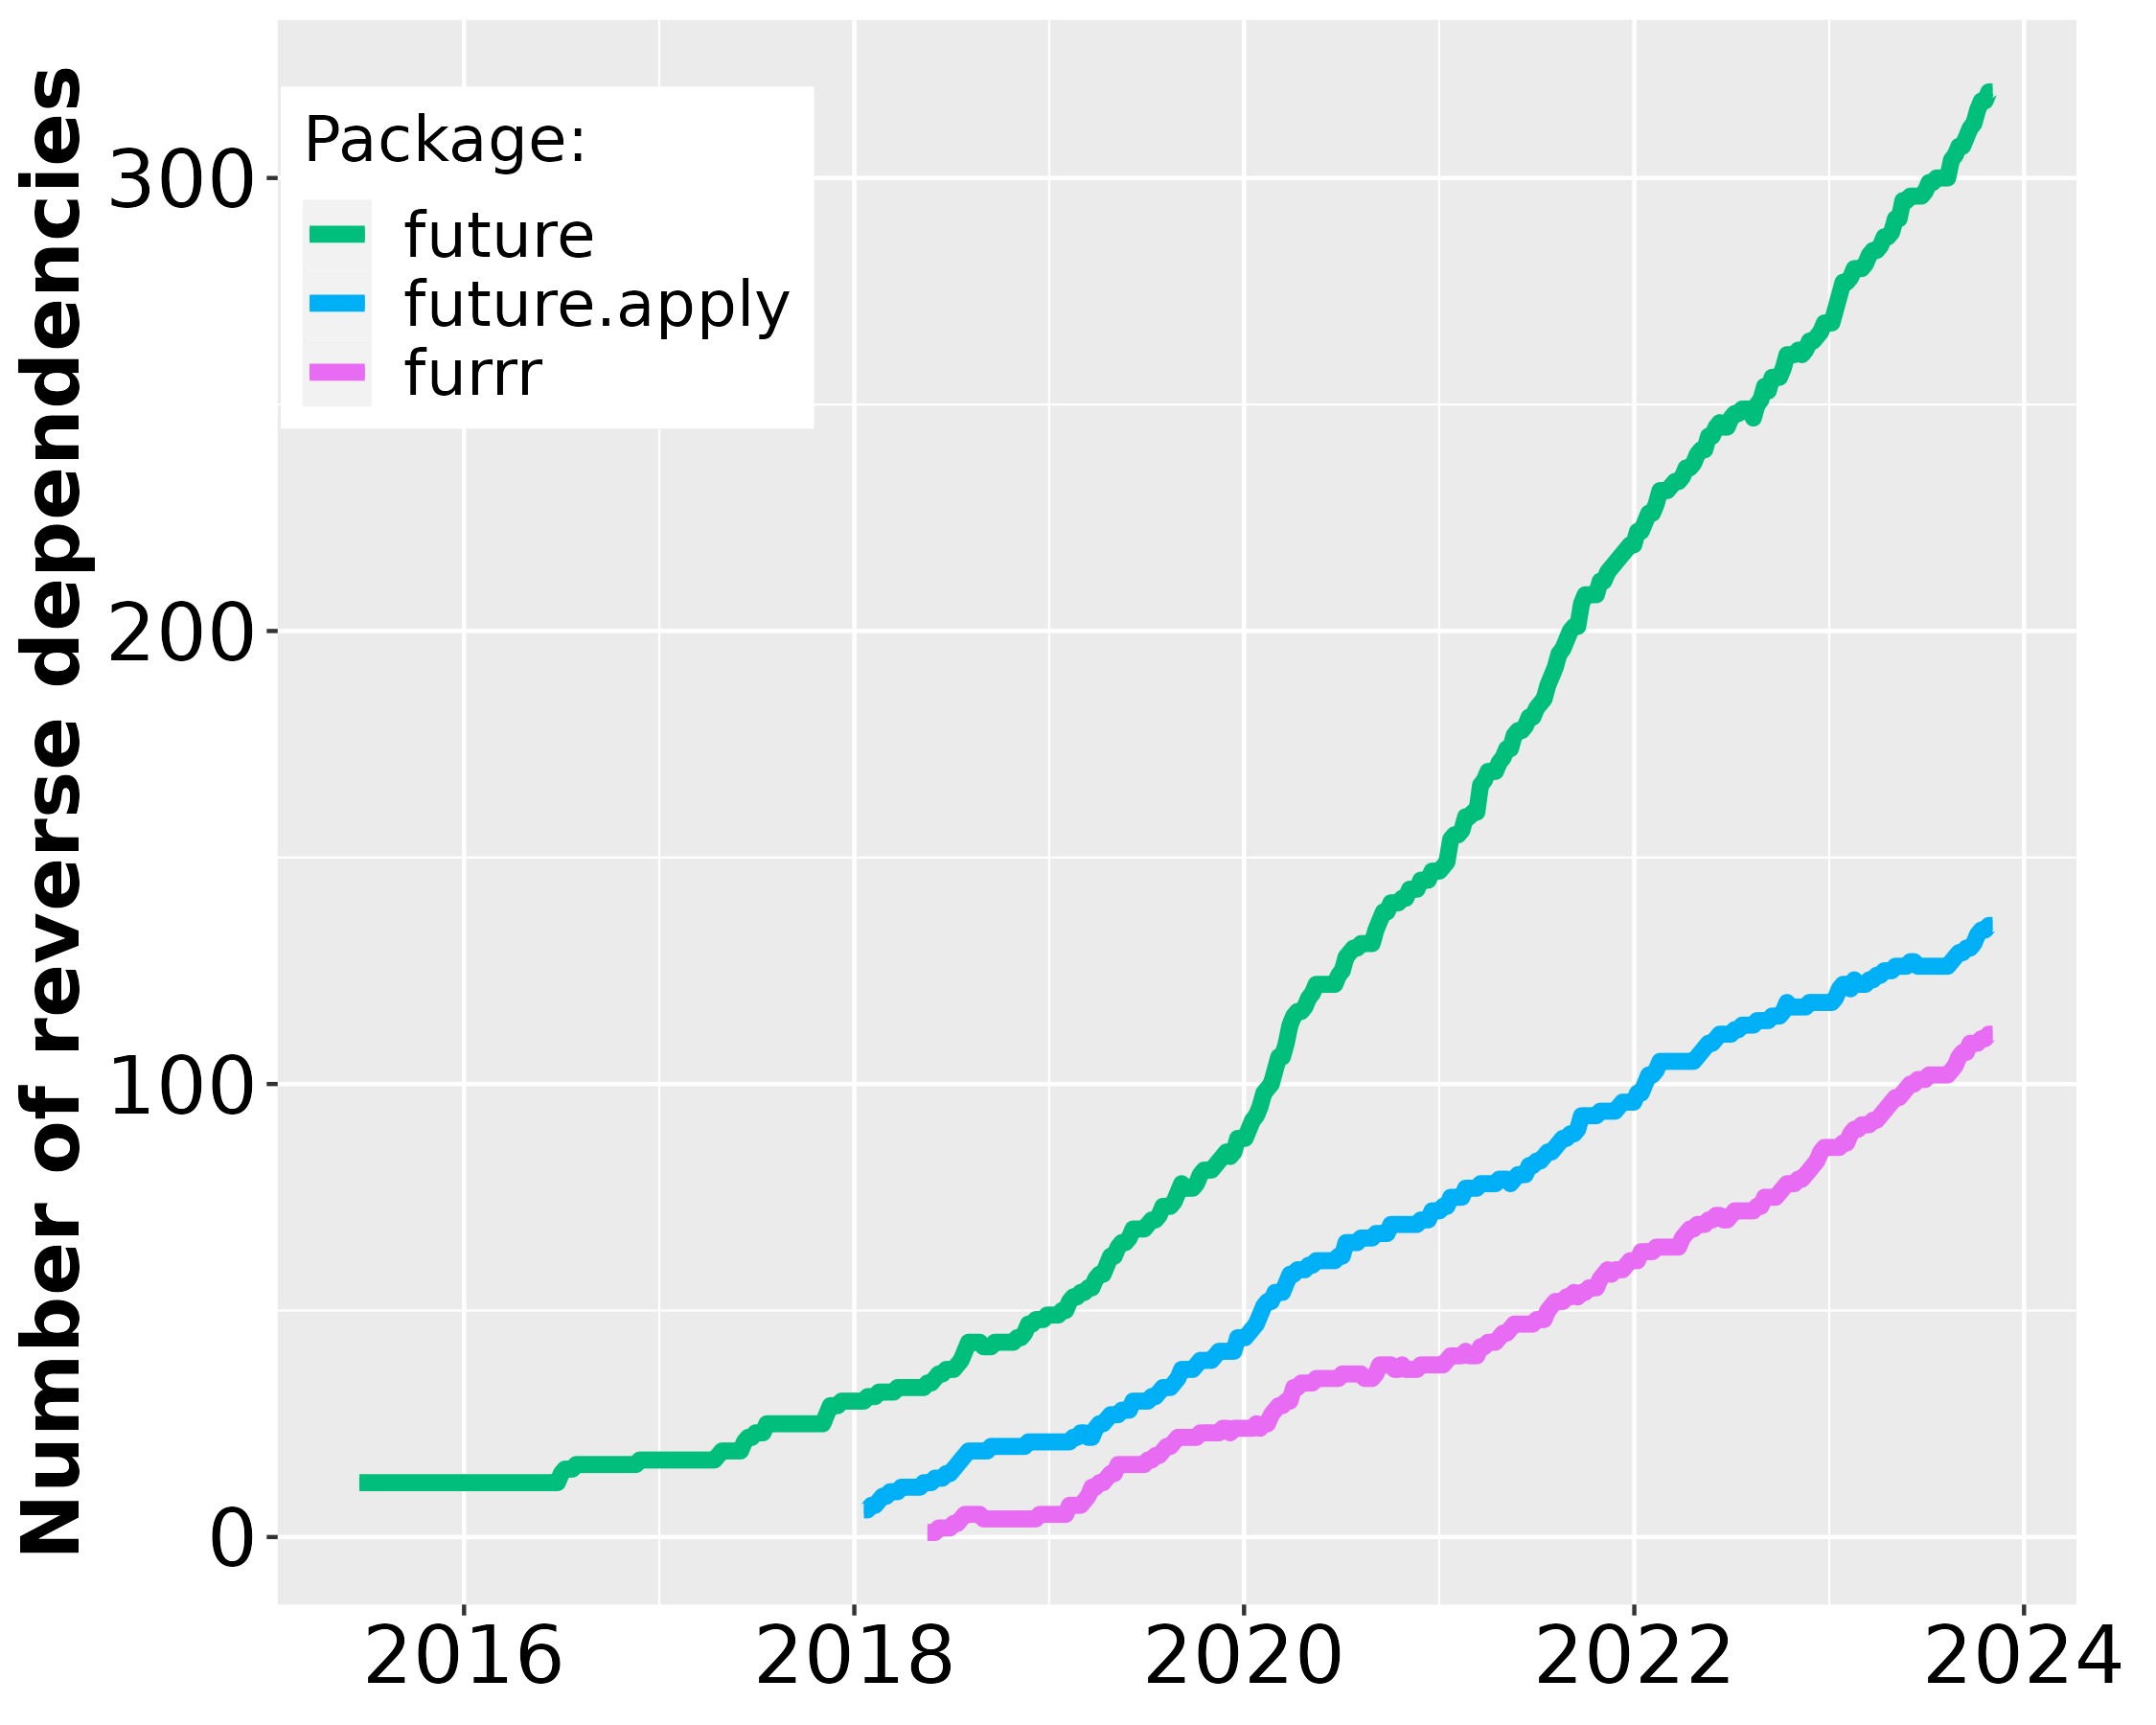 A line graph with 'Date' (2015-2022) on the horizontal axis and 'Number of reverse dependencies on CRAN' on the vertical axis. Rapidly growing curves for three packages, 'future', 'future.apply', and 'furrr', are shown with 'future' increasing the fastest.